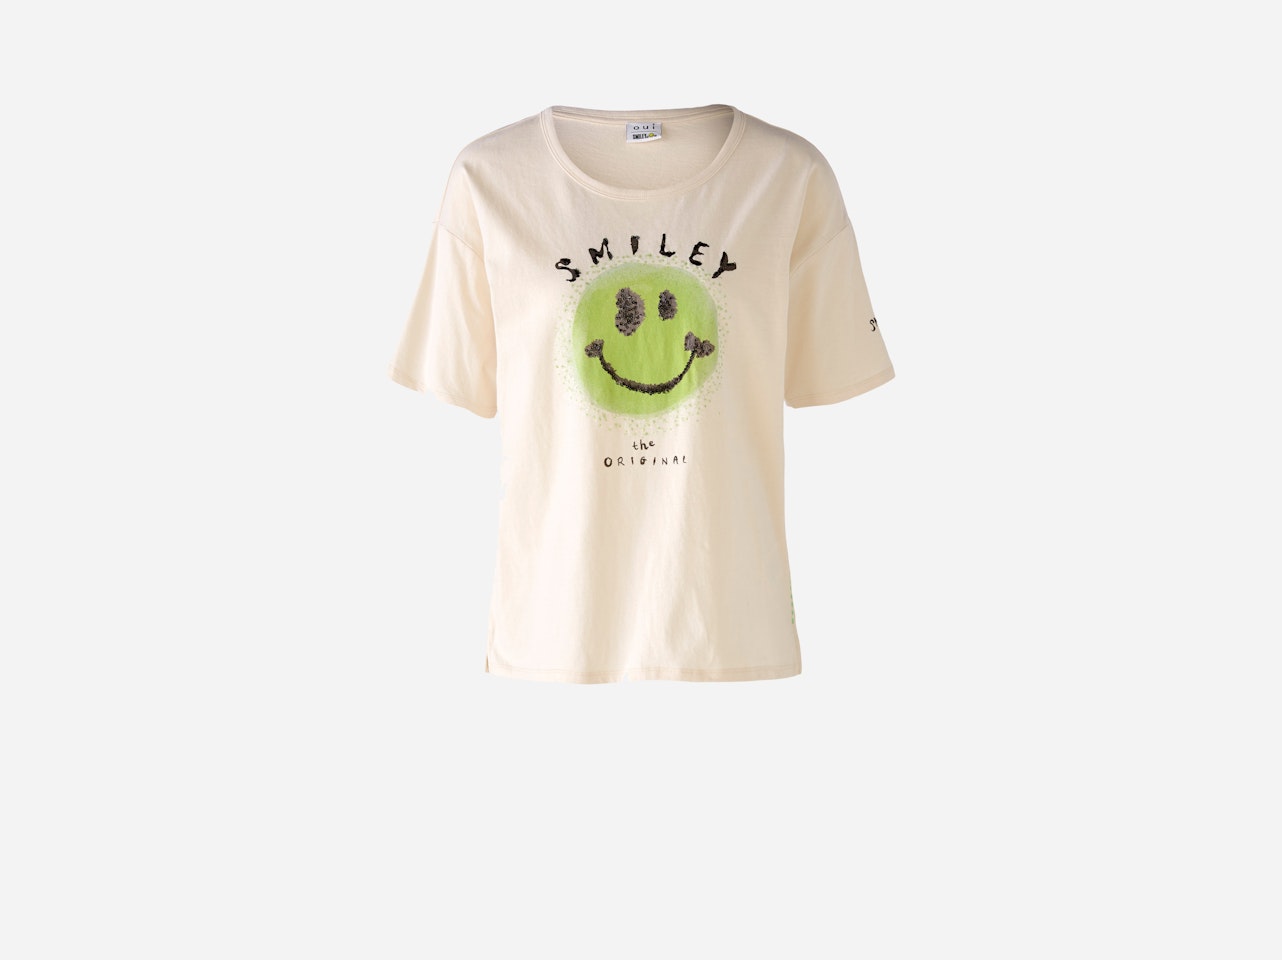 T-shirt oui x Smiley® with Smiley Motif